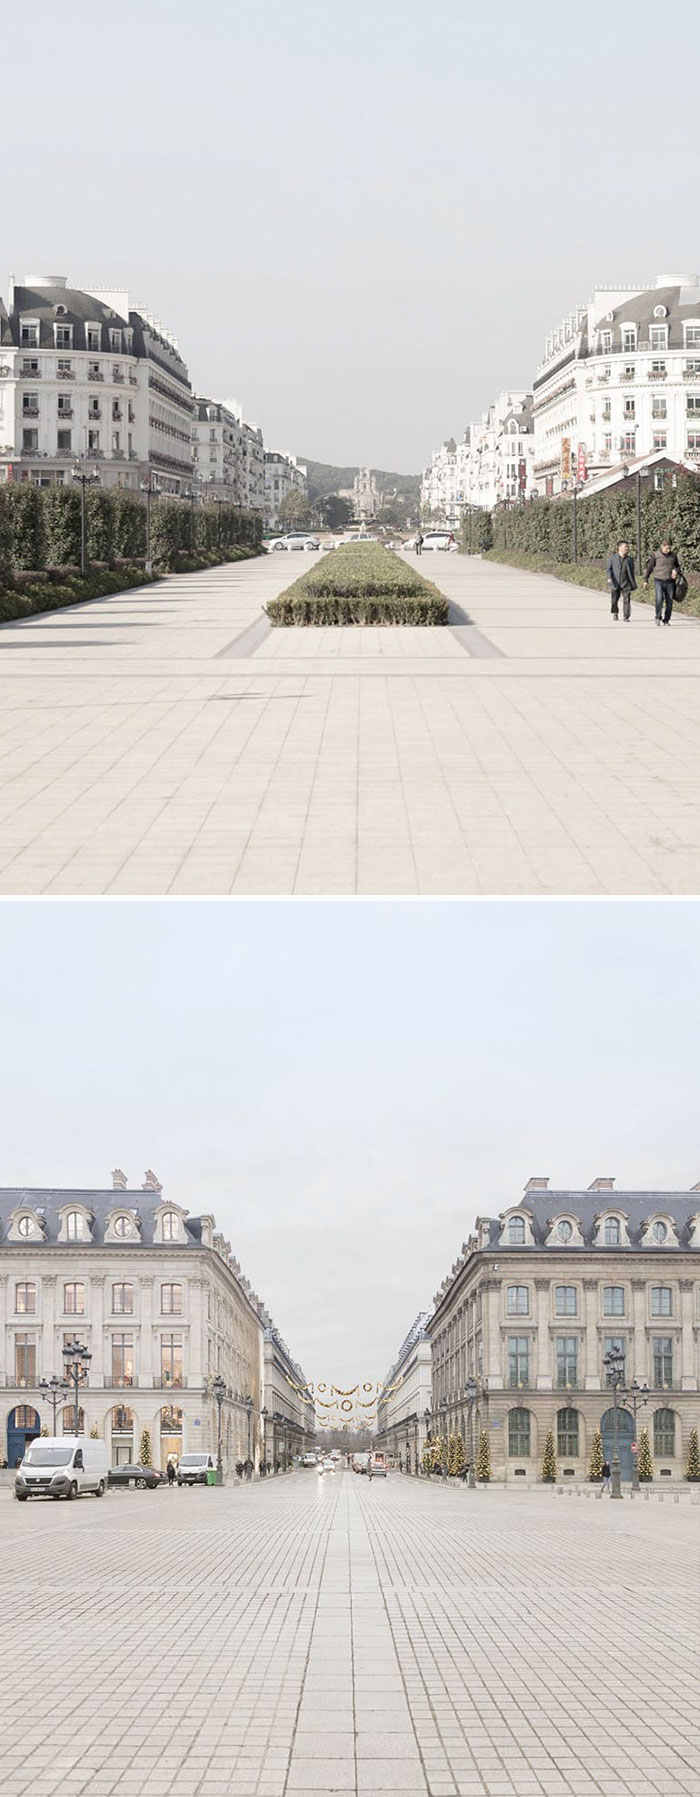 tianducheng-china-knockoff-architecture-paris-syndrome-francois-prost-27-5aafb4234d167__700